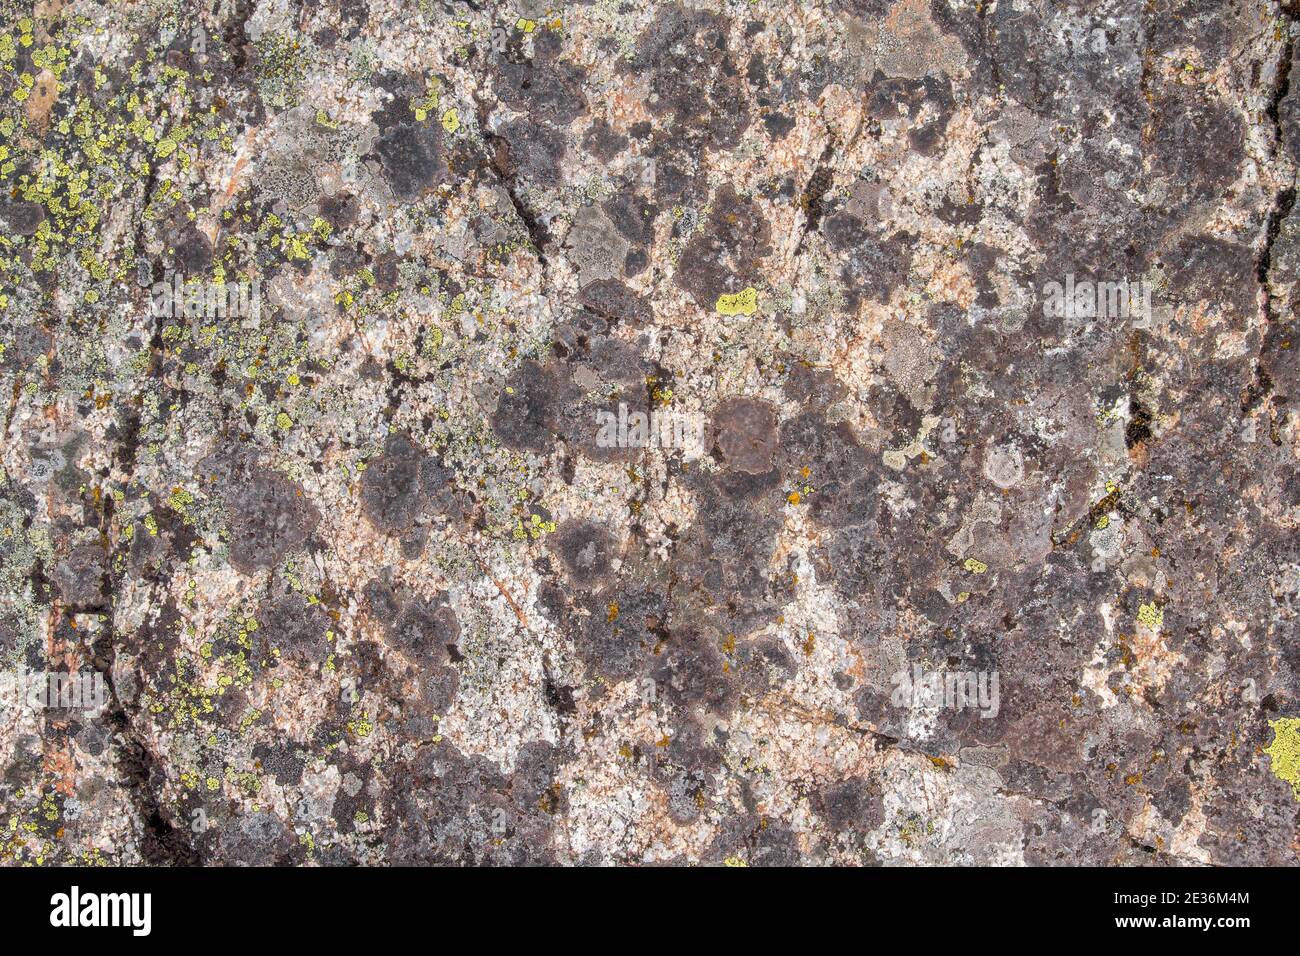 The texture of the stone is covered with green lichen. The surface of an old stone. Stock Photo